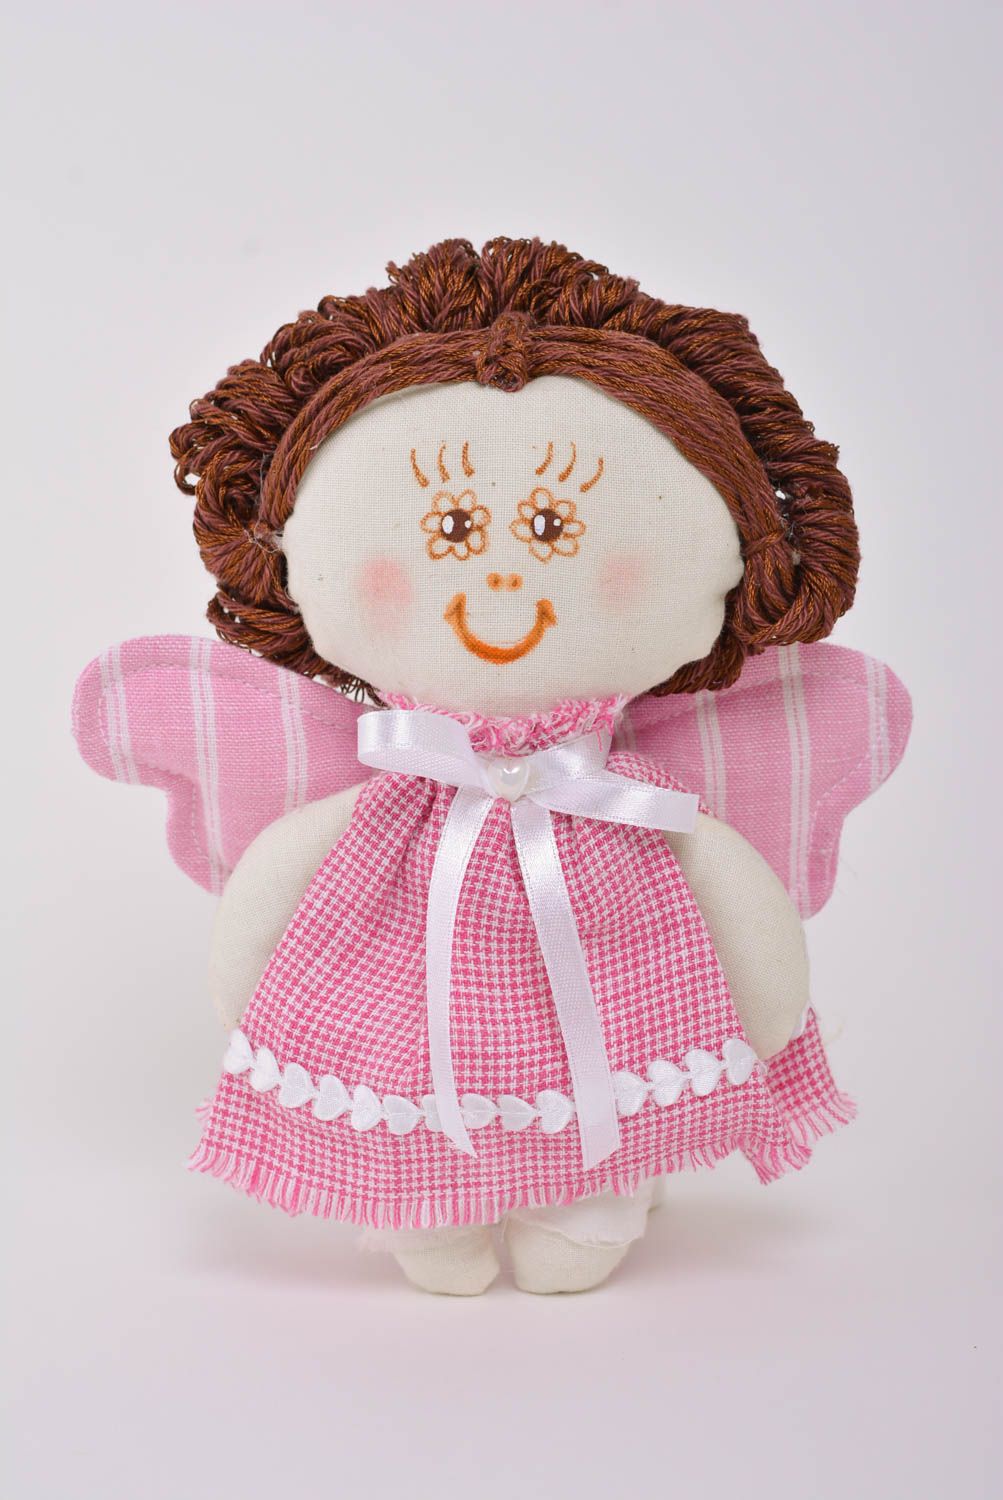 Handmade soft toy sewn of cotton fabric in the shape of angel girl in pink dress photo 1